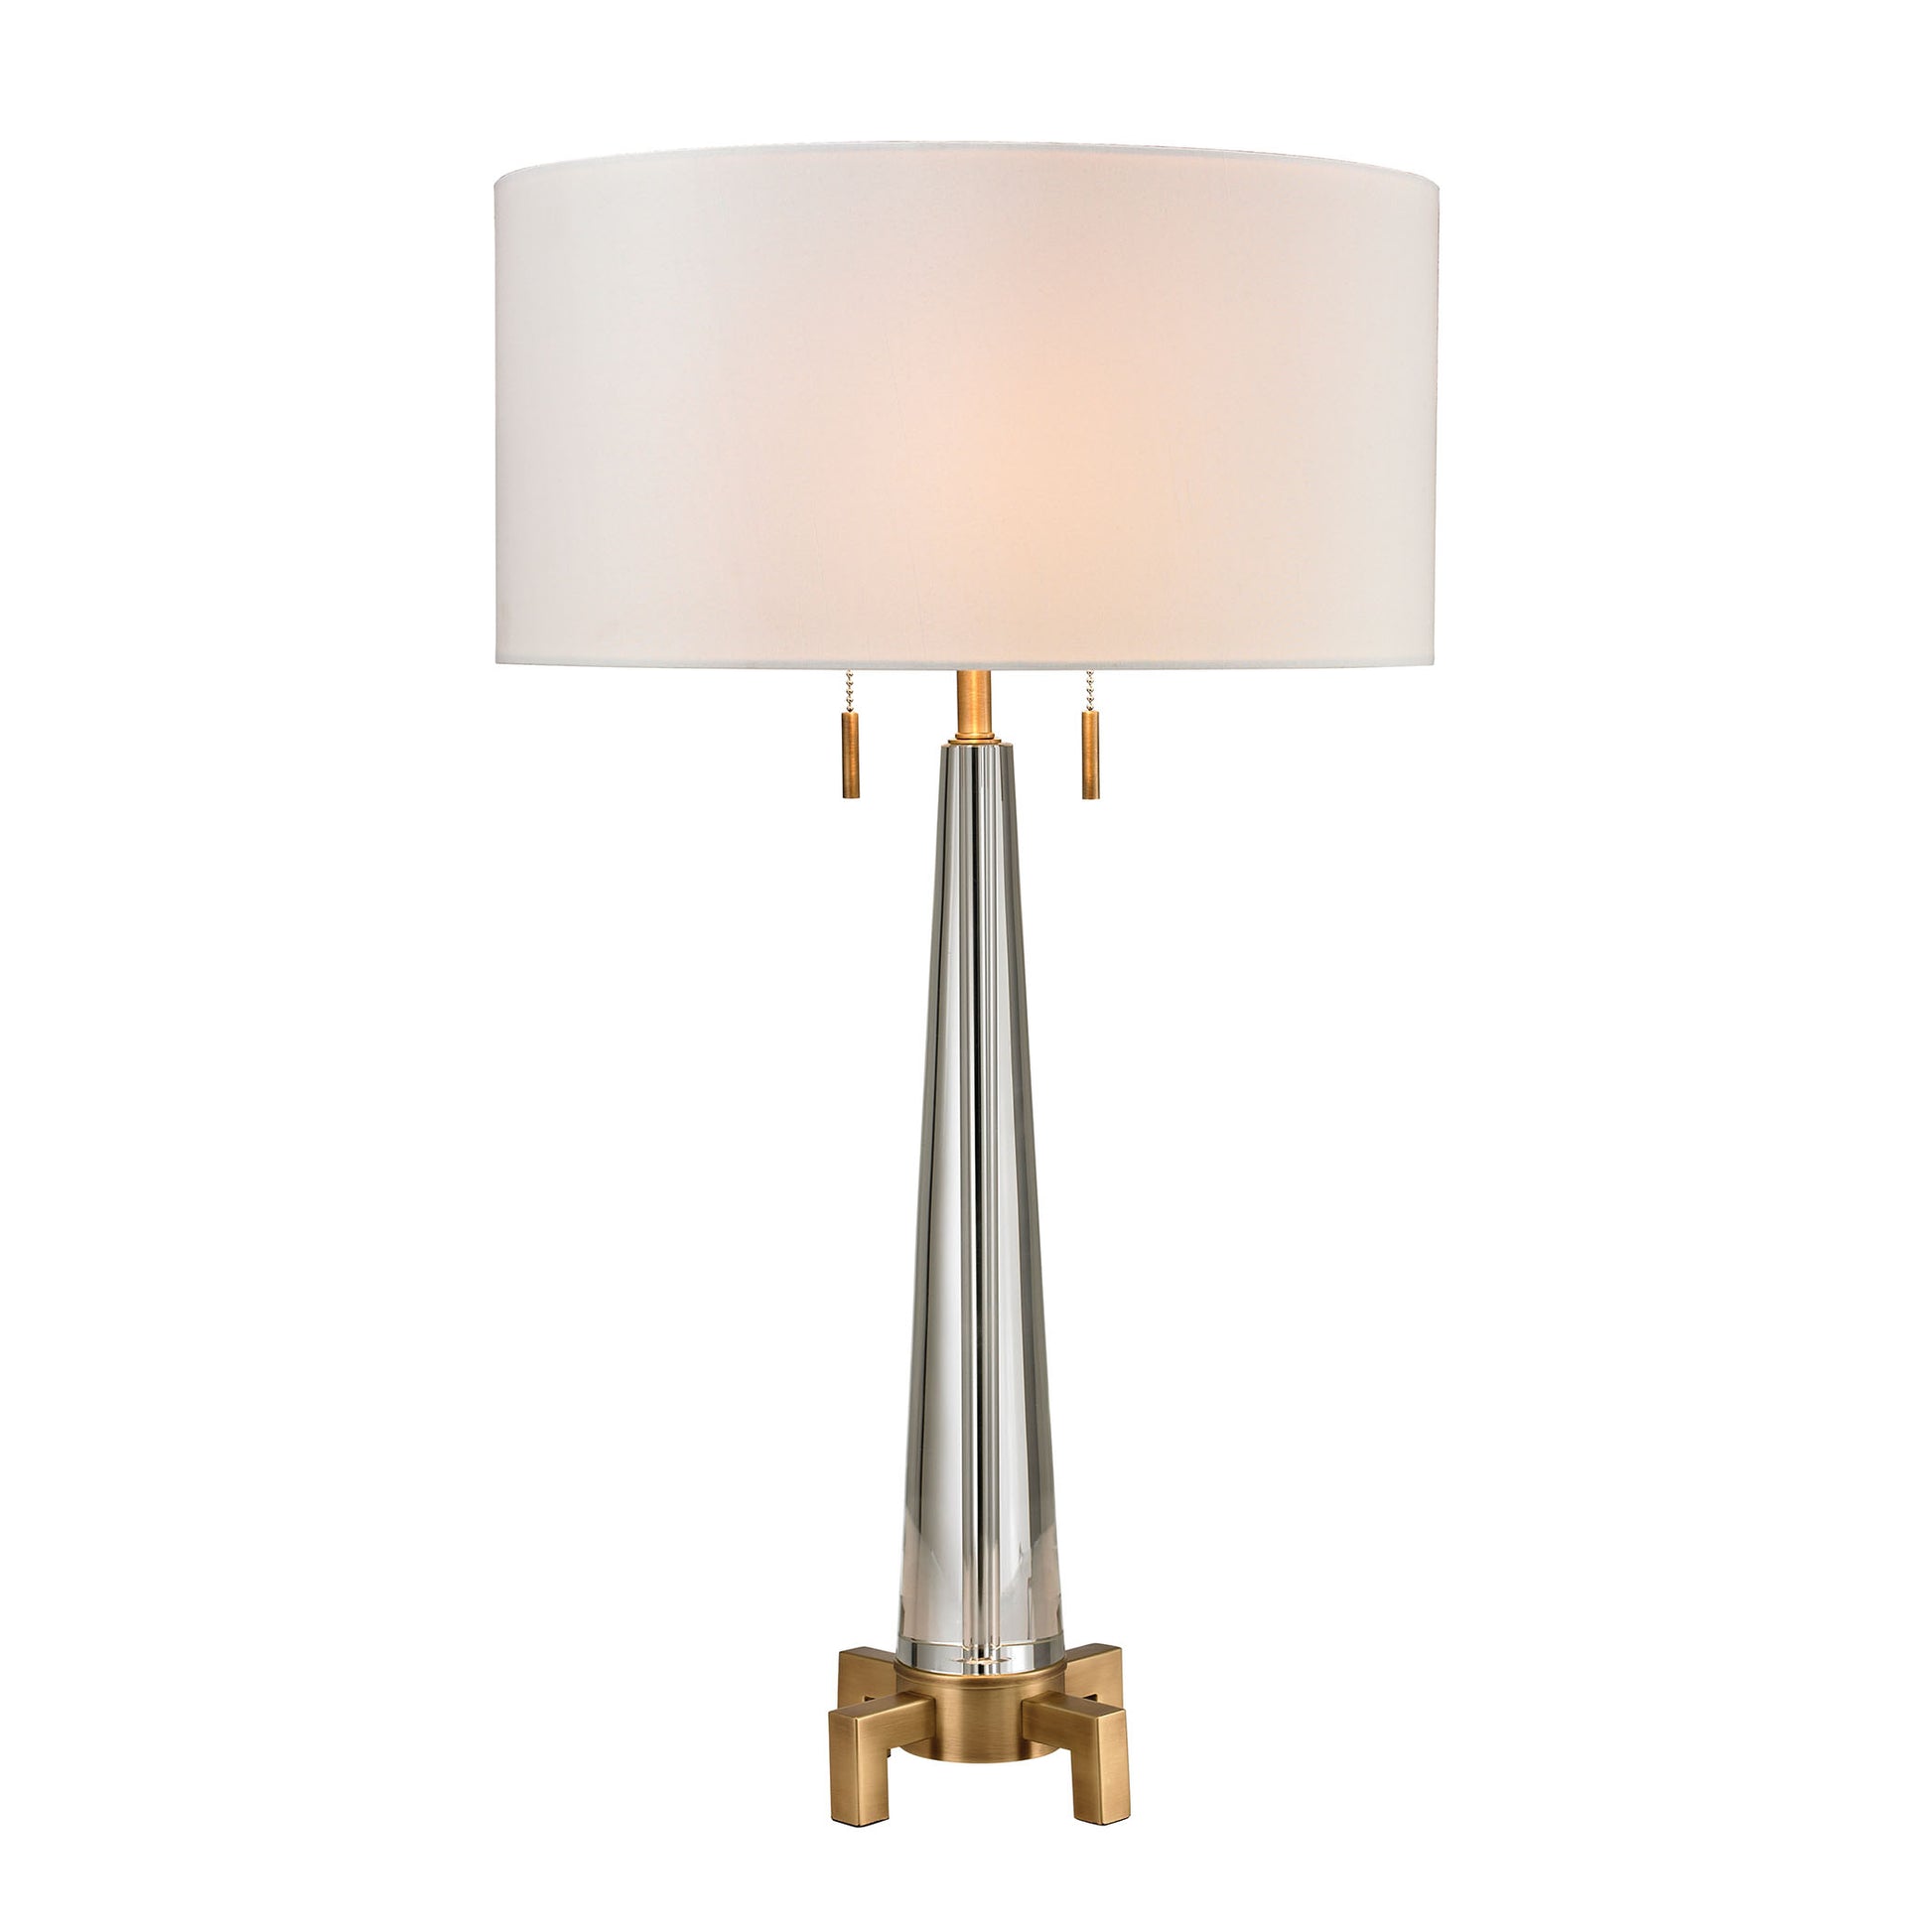 Dimond Lighting Bedford Solid Crystal Table Lamp in Aged Brass Table Lamps, Dimond Lighting, - Modish Store